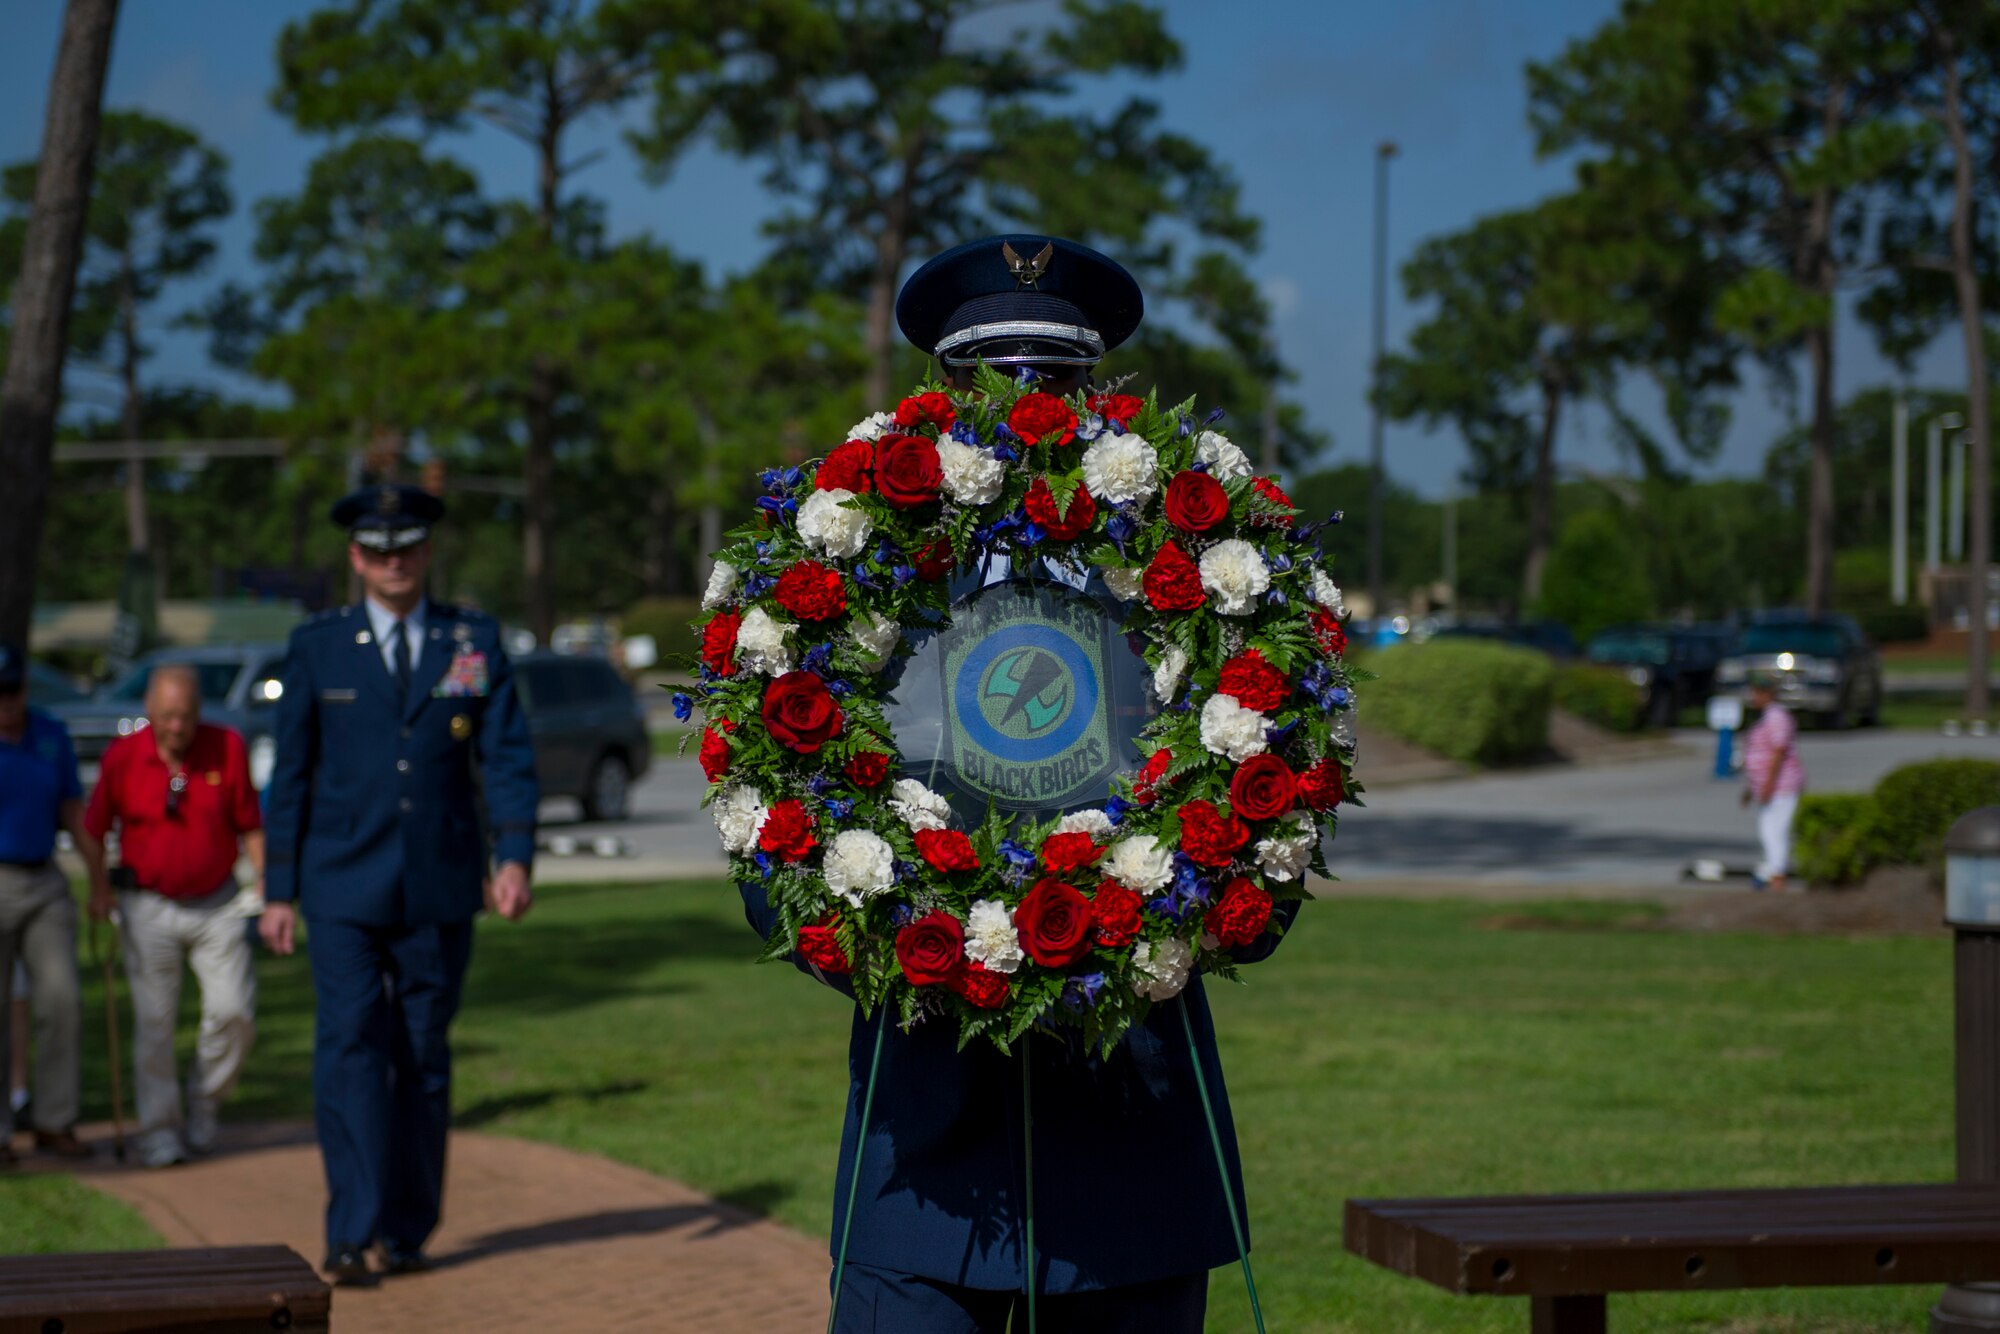 A member of the Hurlburt Field Honor Guard carries a wreath to the Operation Eagle Claw memorial ceremony at Hurlburt Field, Fla., June 23, 2017. Operation Eagle Claw was an attempted hostage-rescue mission in 1980 that resulted in five 8th Special Operations Squadron Airmen and three Marines sacrificing their lives when two of the involved aircraft collided at the Desert One staging site. (U.S. Air Force photo by Staff Sgt. Victor J. Caputo)